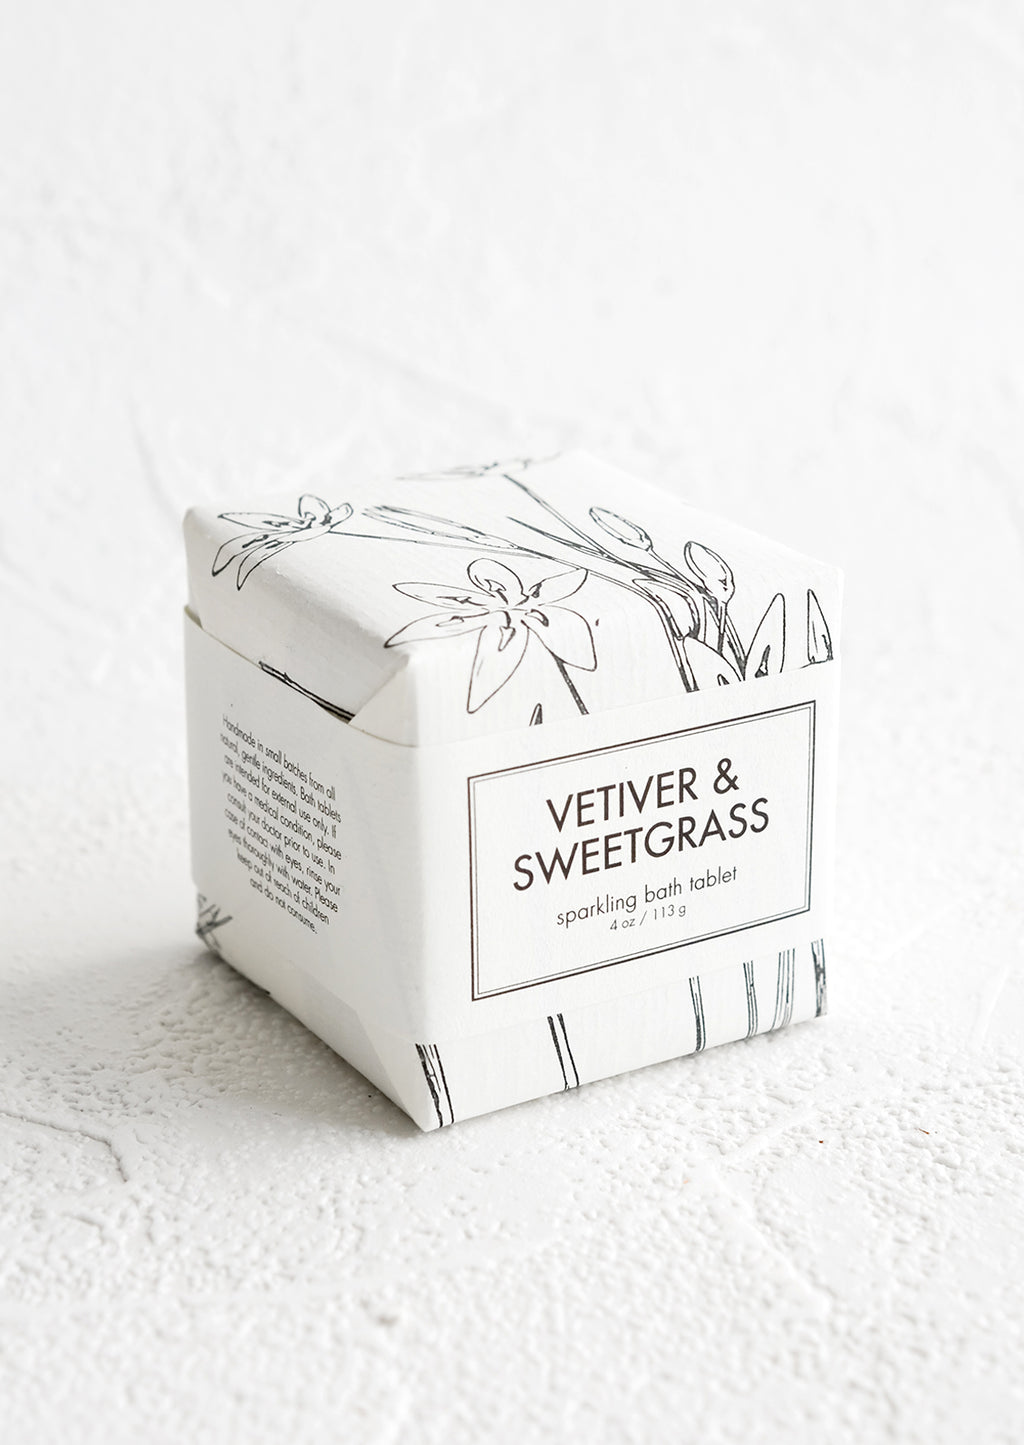 Vetiver & Sweetgrass: A cube-shaped bath fizzy box with black and white botanical graphic packaging.